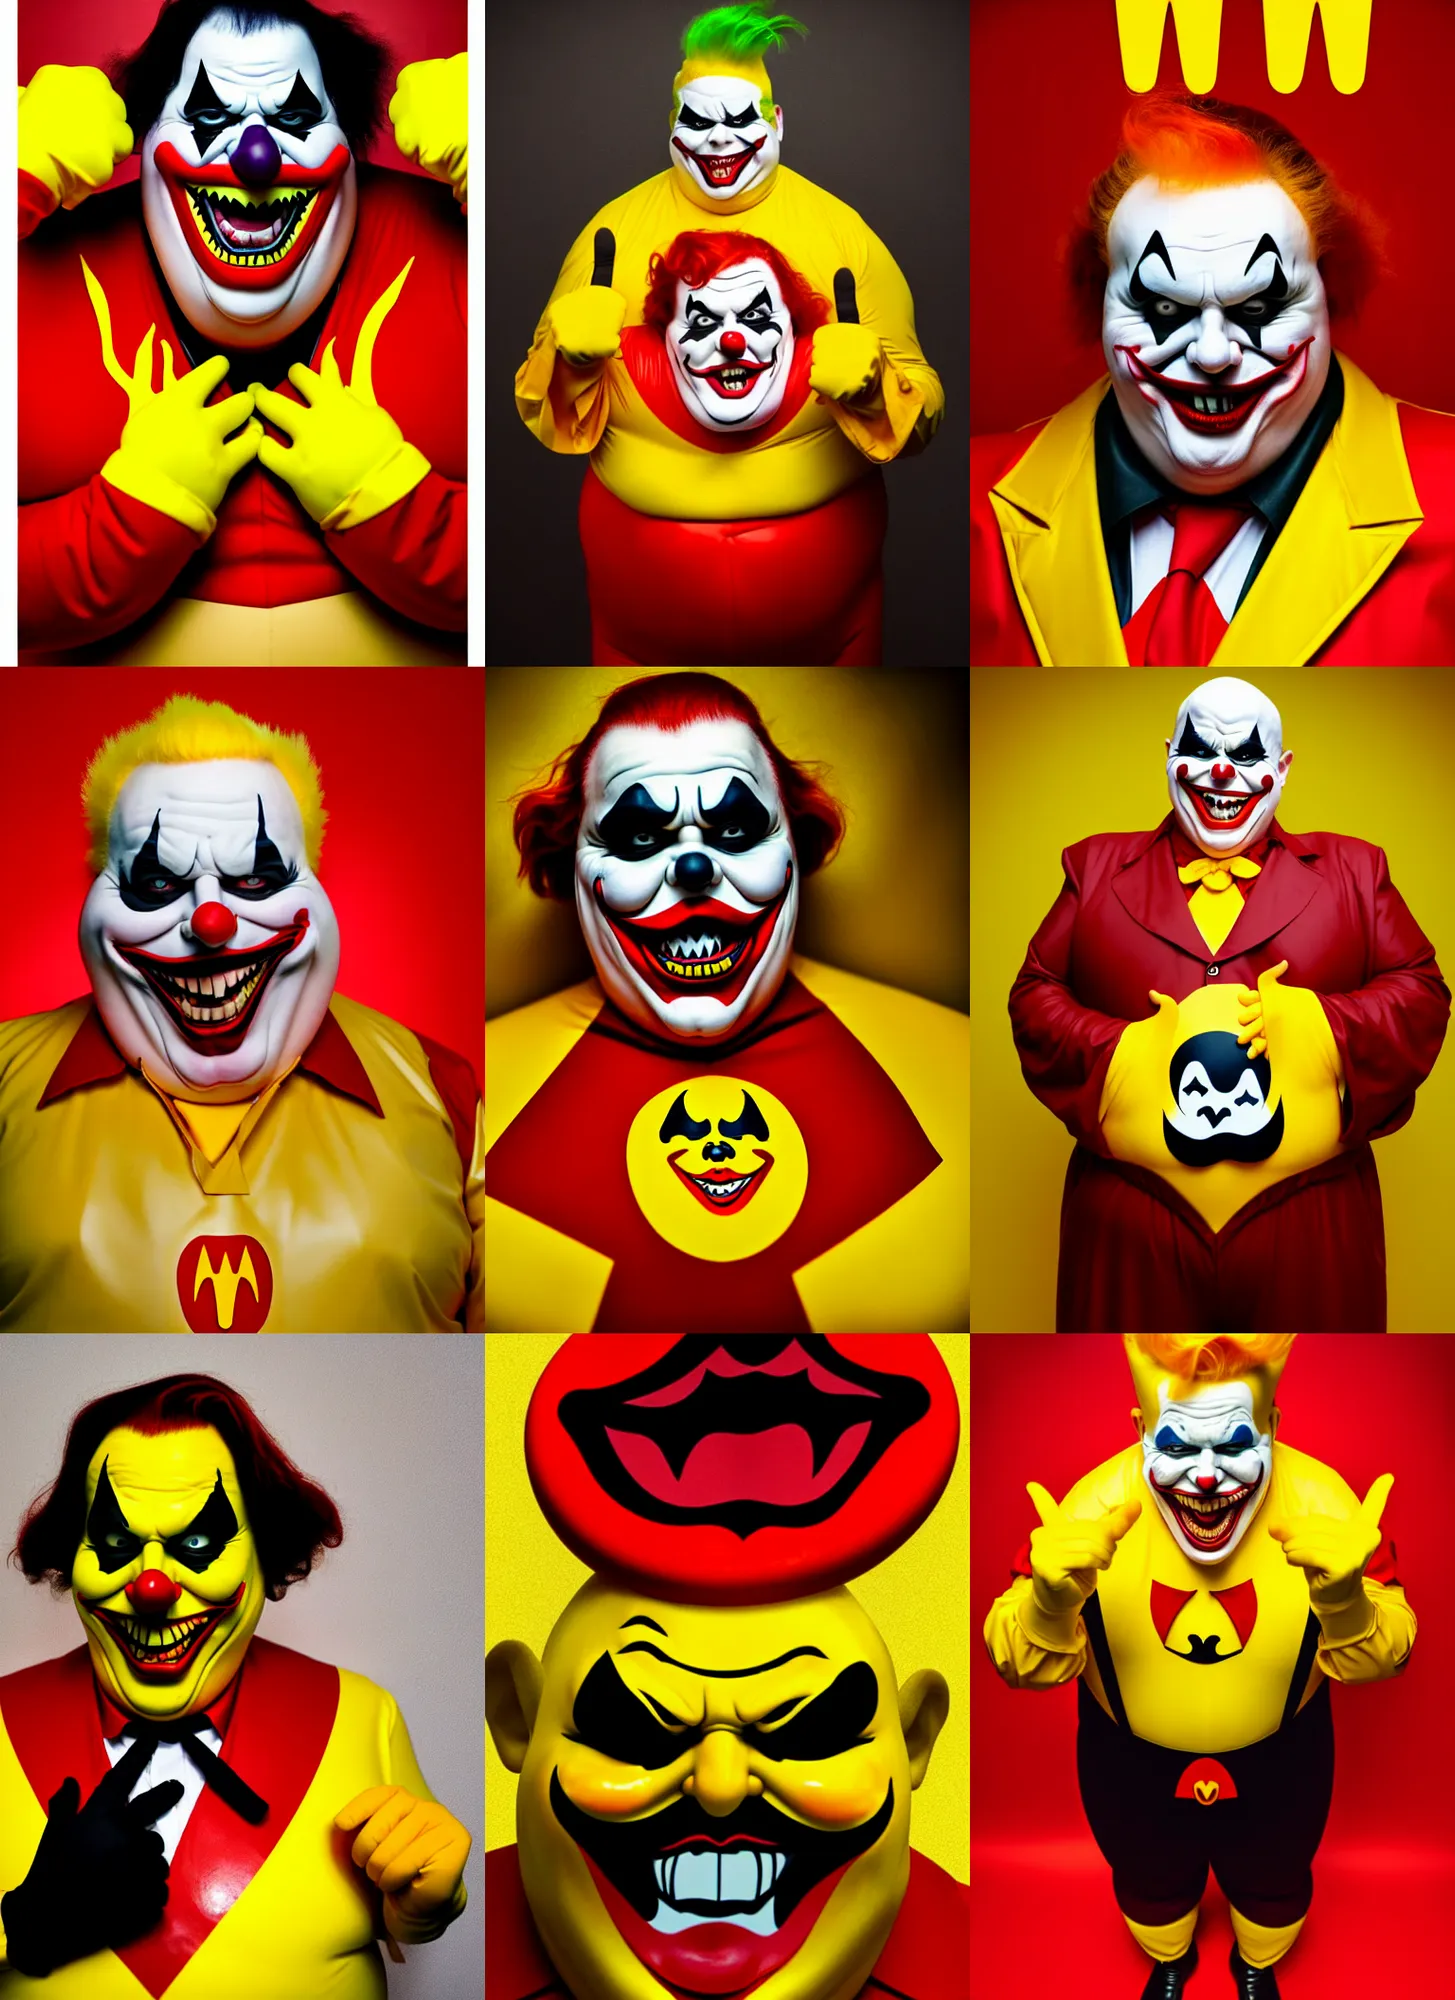 Prompt: wide angle lens of a very fat sinister looking joker dressed in yellow and red rubber latex Ronald Macdonalds costume, red hair, a Macdonalds logo on his chest, illustration inspired by Oleg Vdovenko